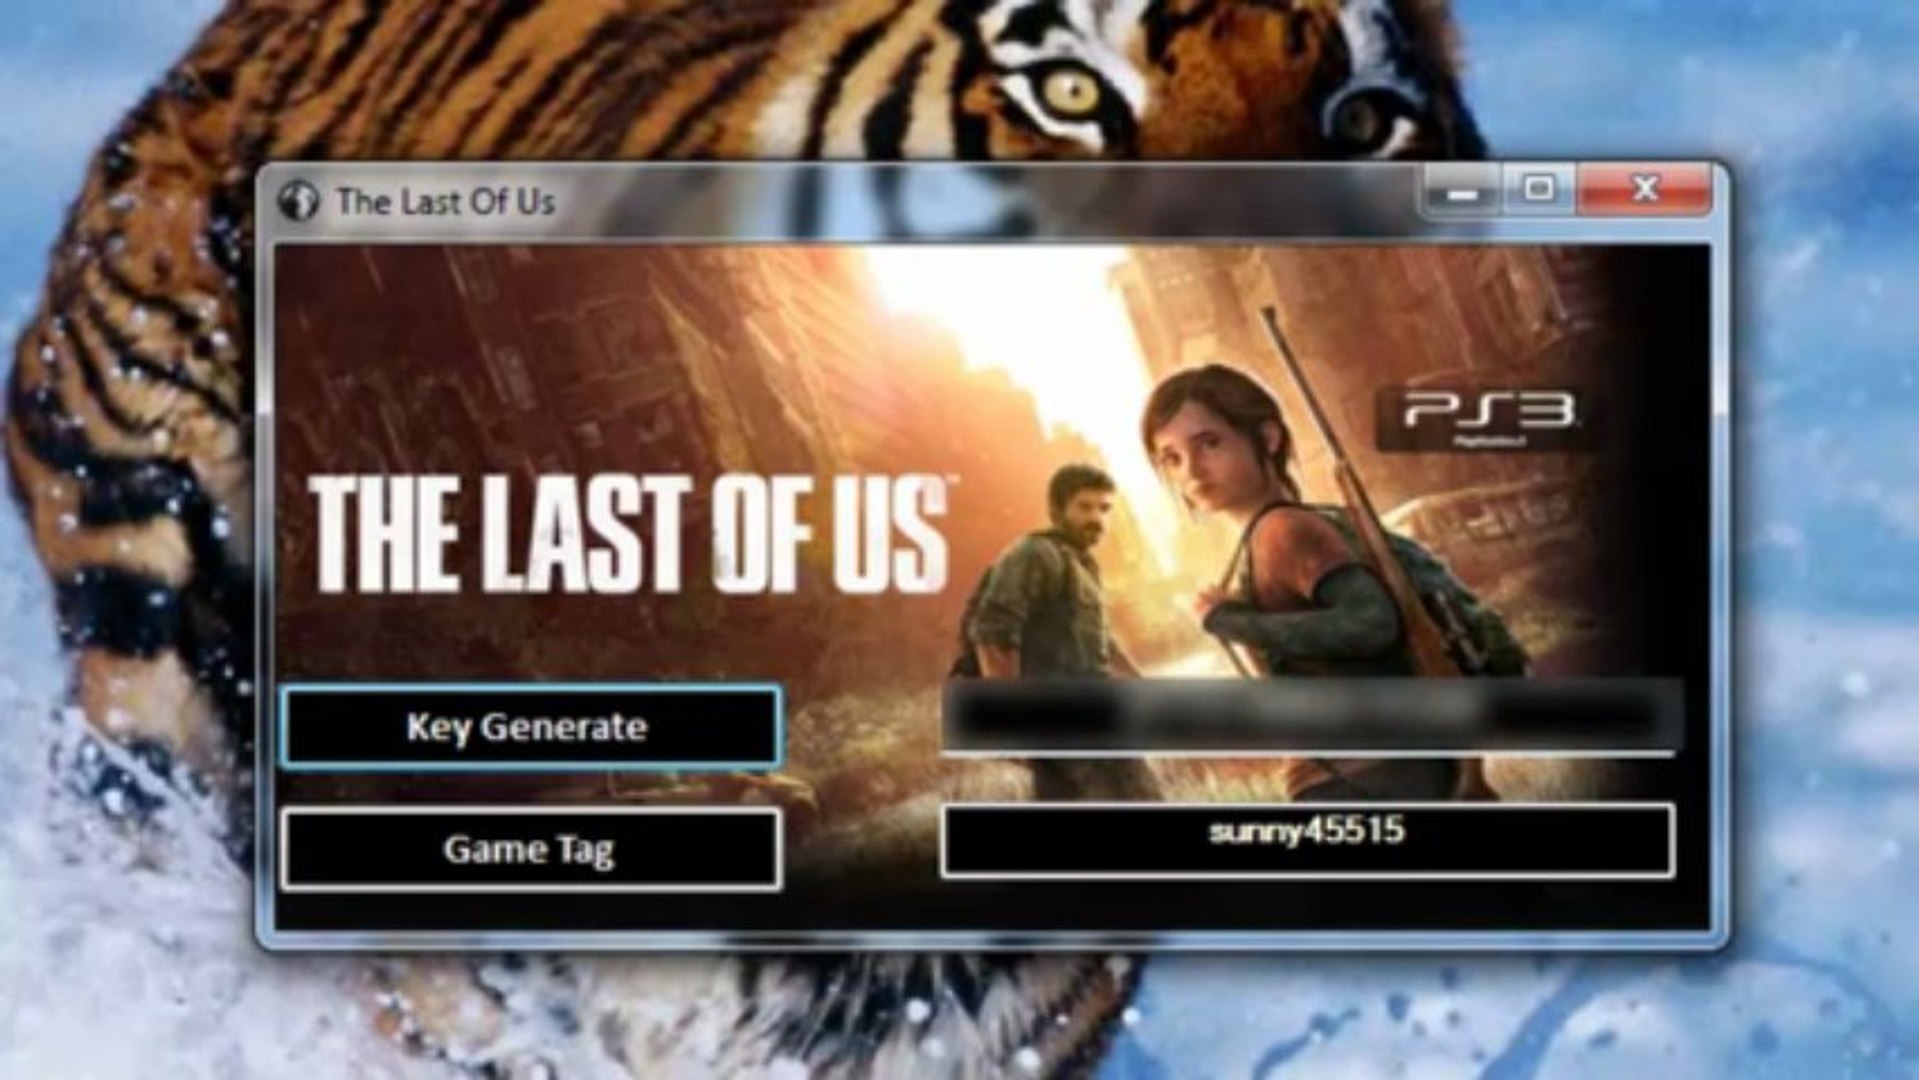 The Last Of Us Free Ps3 Codes